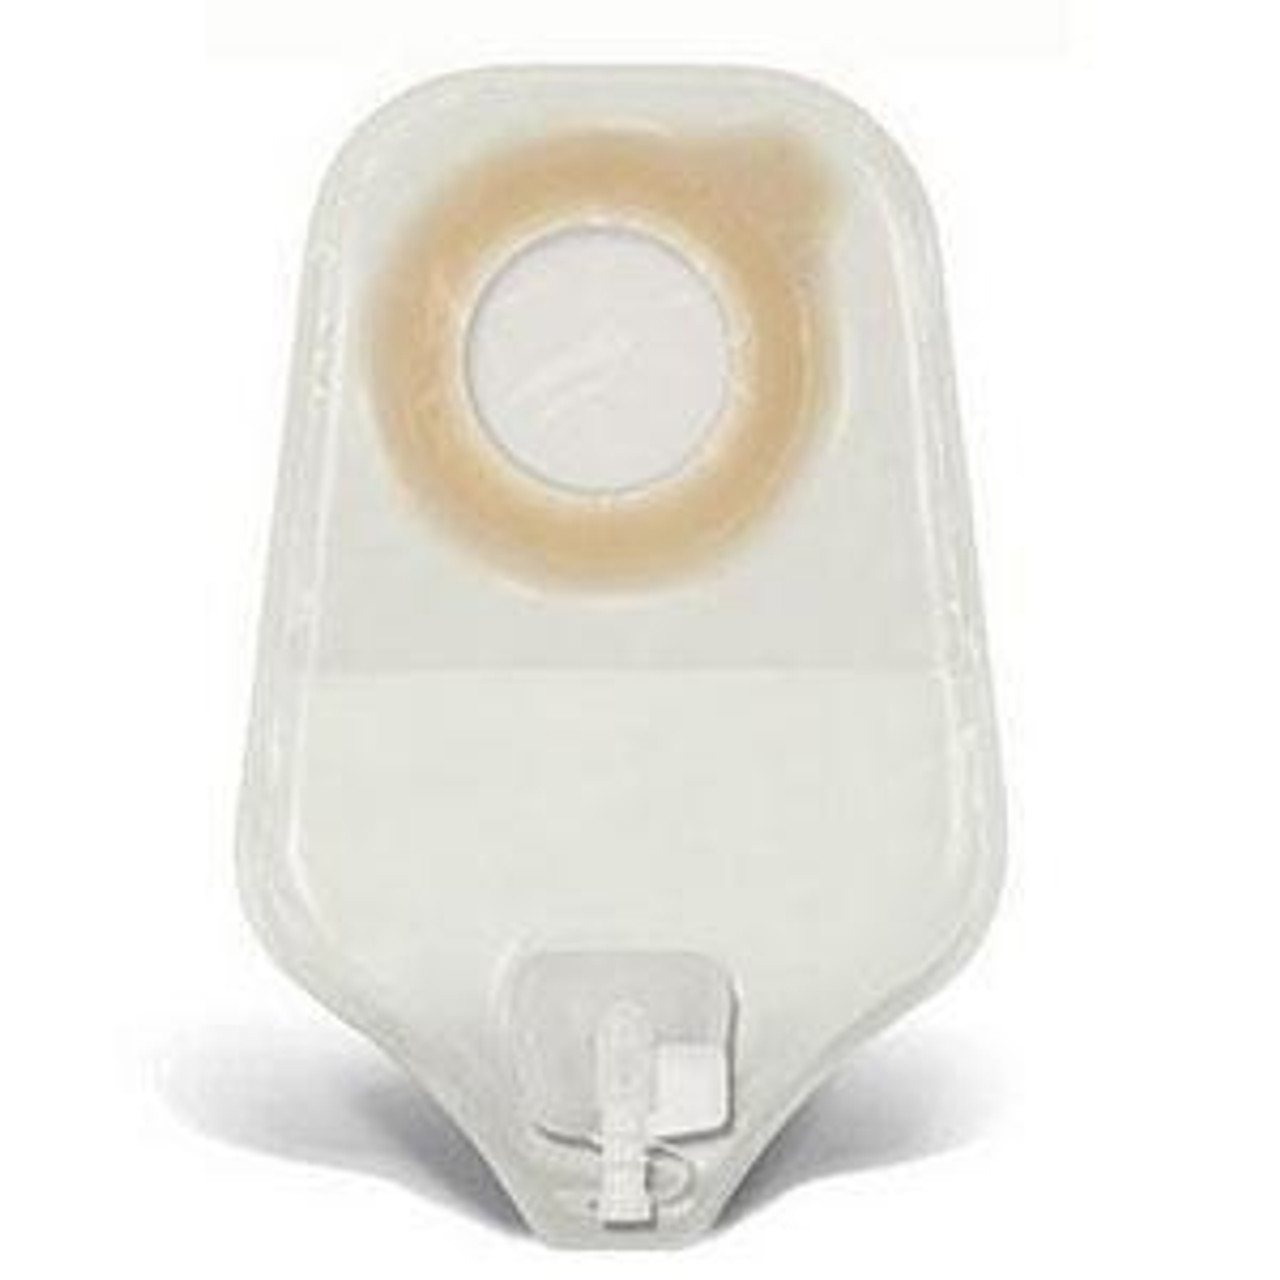 Convatec 405446 SYNERGY Urostomy Pouch W/ACCUSEAL TRNS SM 1/2"-7/8" Small BX/10 (CONVATEC 405446)